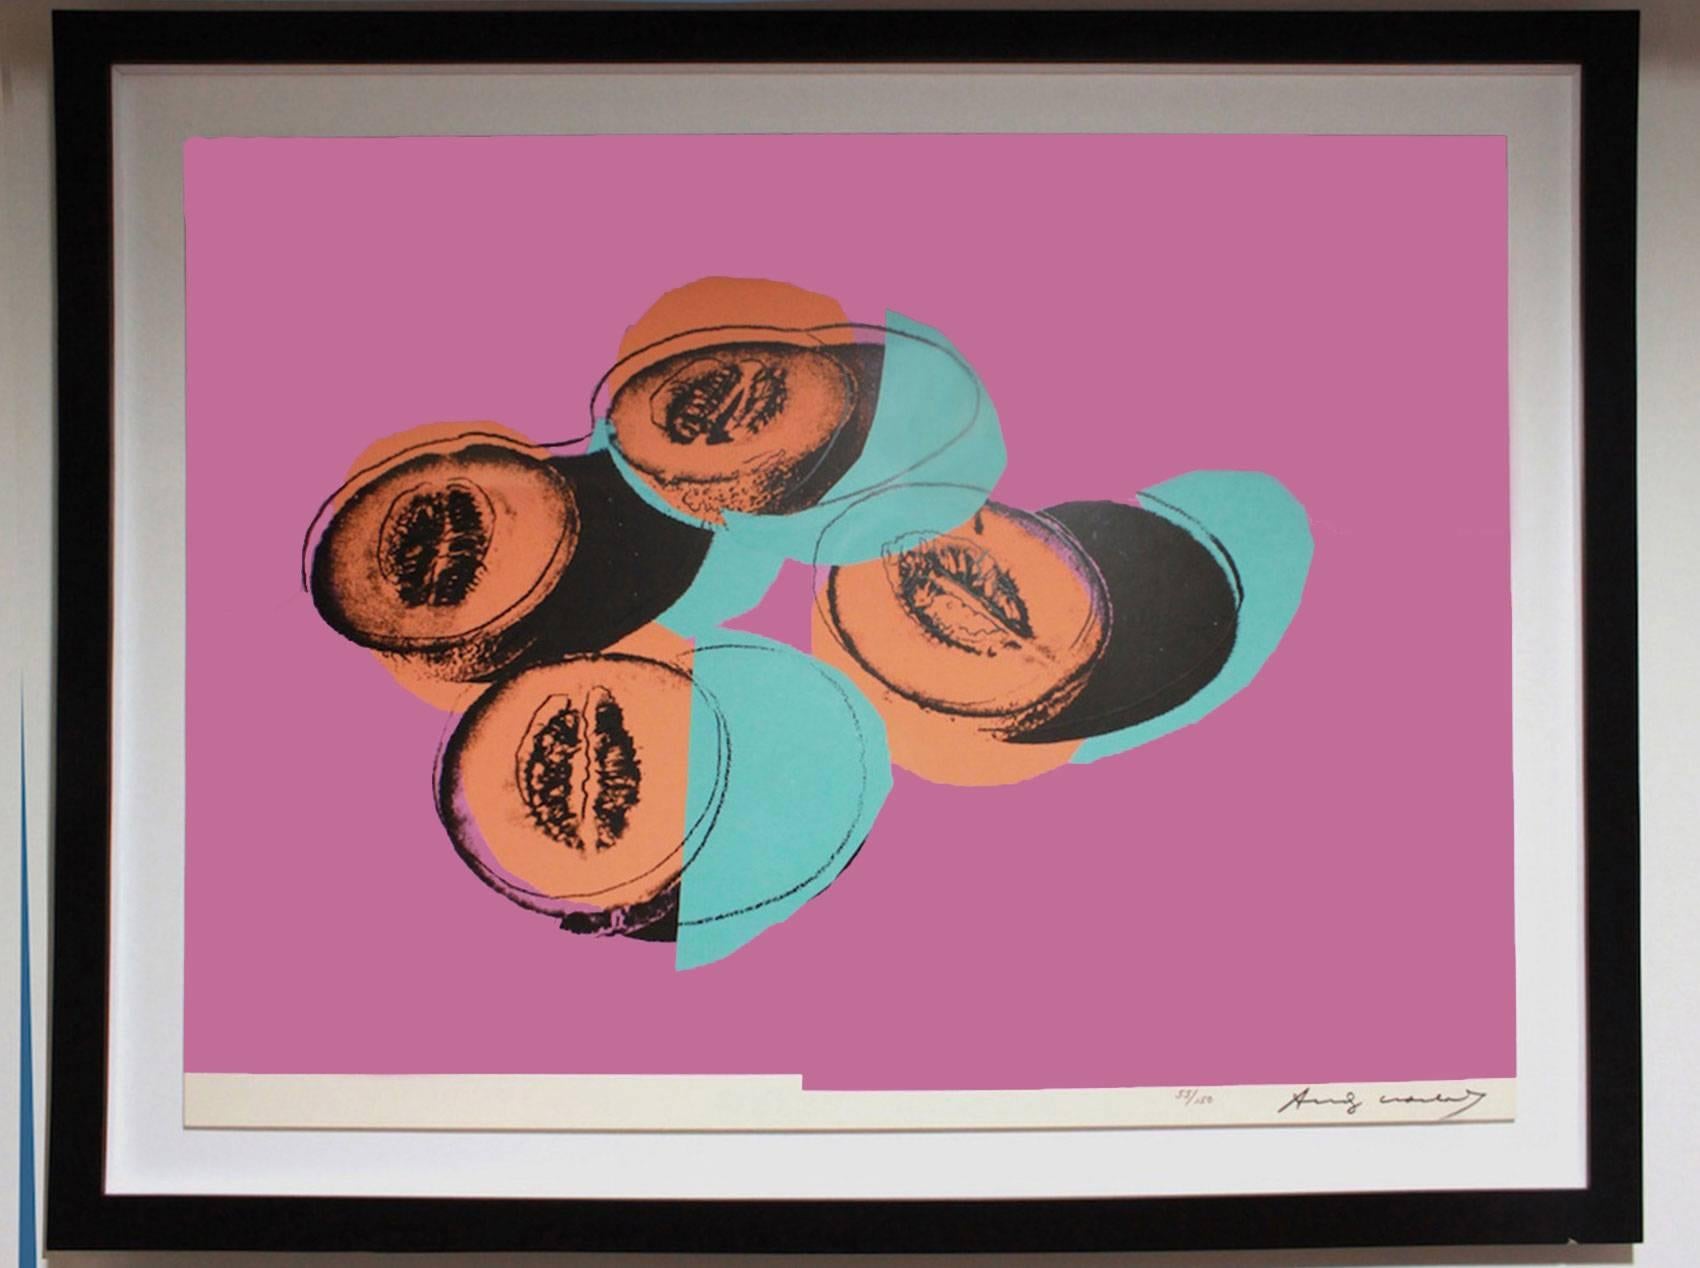 Space Fruit: Cantaloupes (FS II.198)  - Print by Andy Warhol